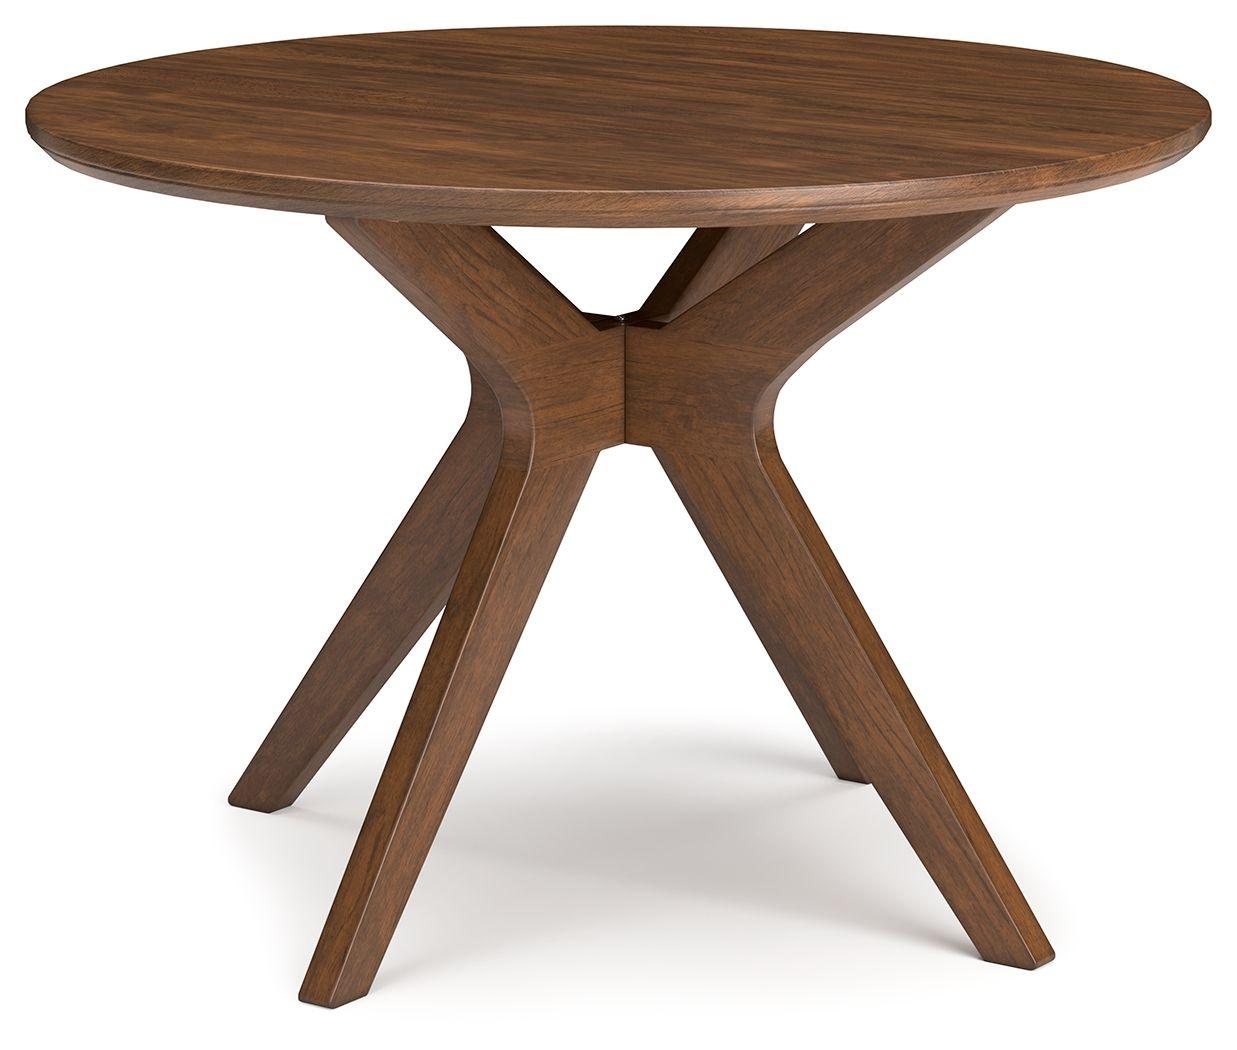 Signature Design by Ashley® - Lyncott - Brown - Round Dining Room Table - 5th Avenue Furniture